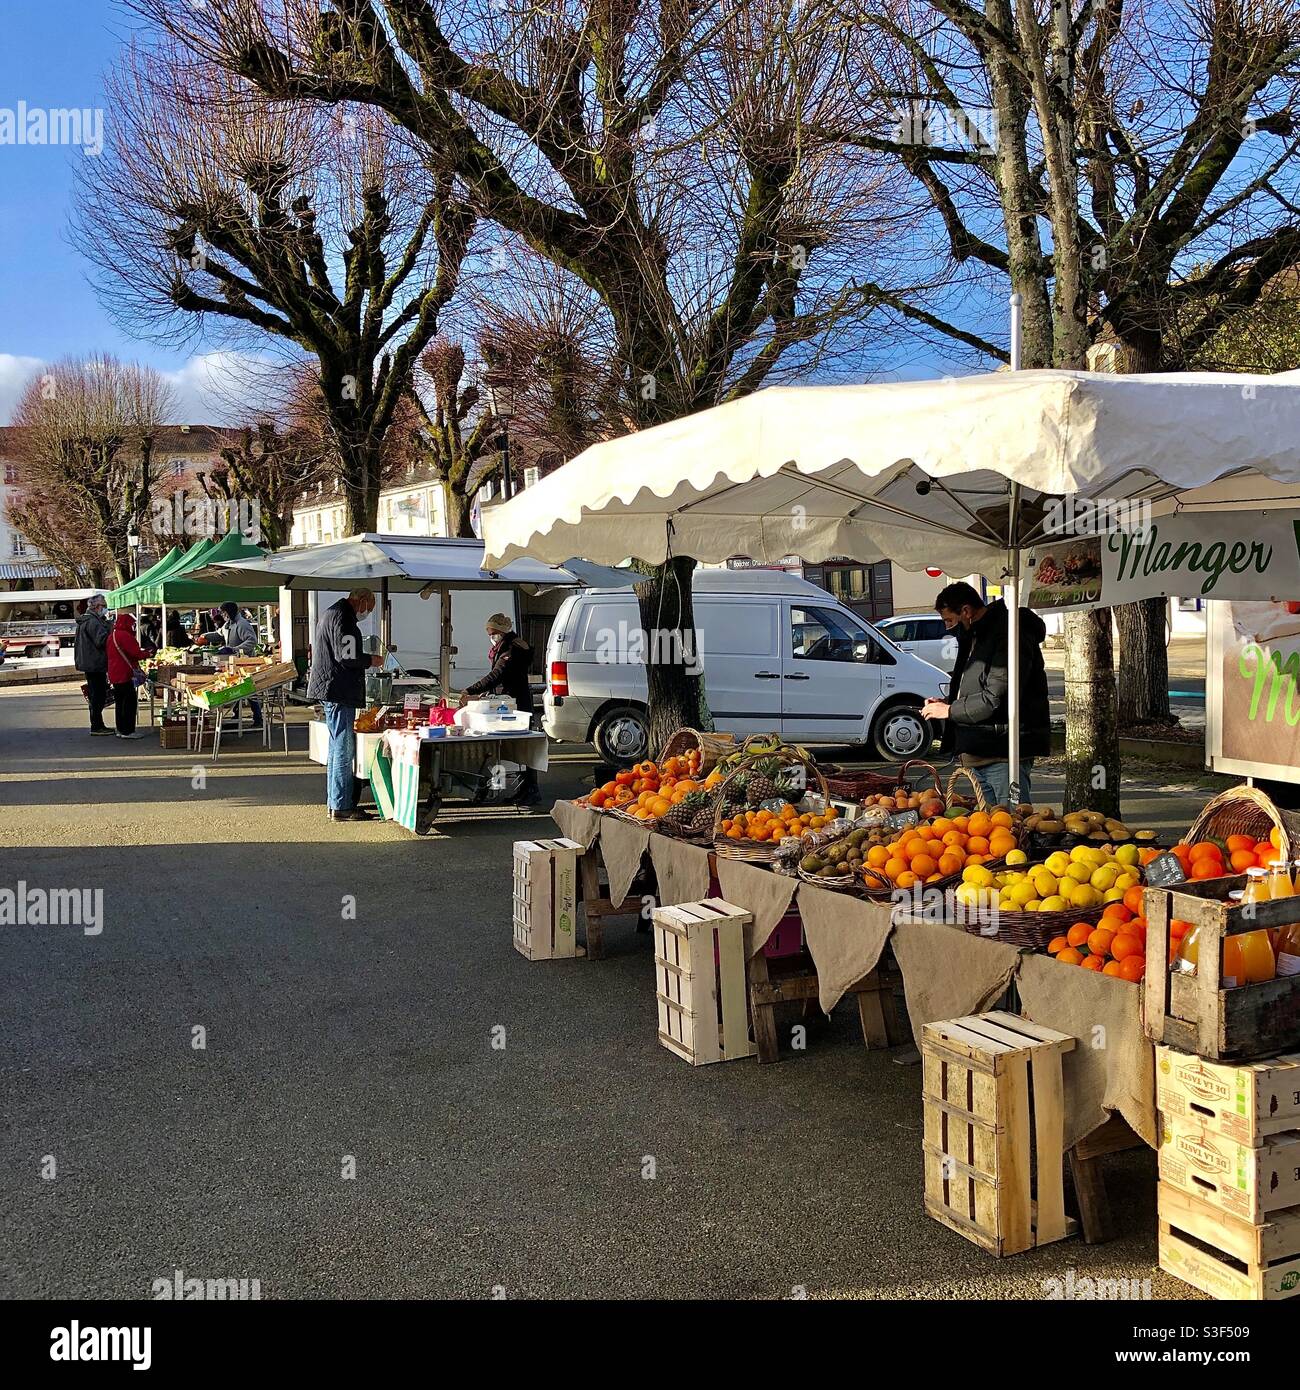 Fruit and vegetable stalls at open-air market - La Roche Posay, Vienne (86), France. Stock Photo